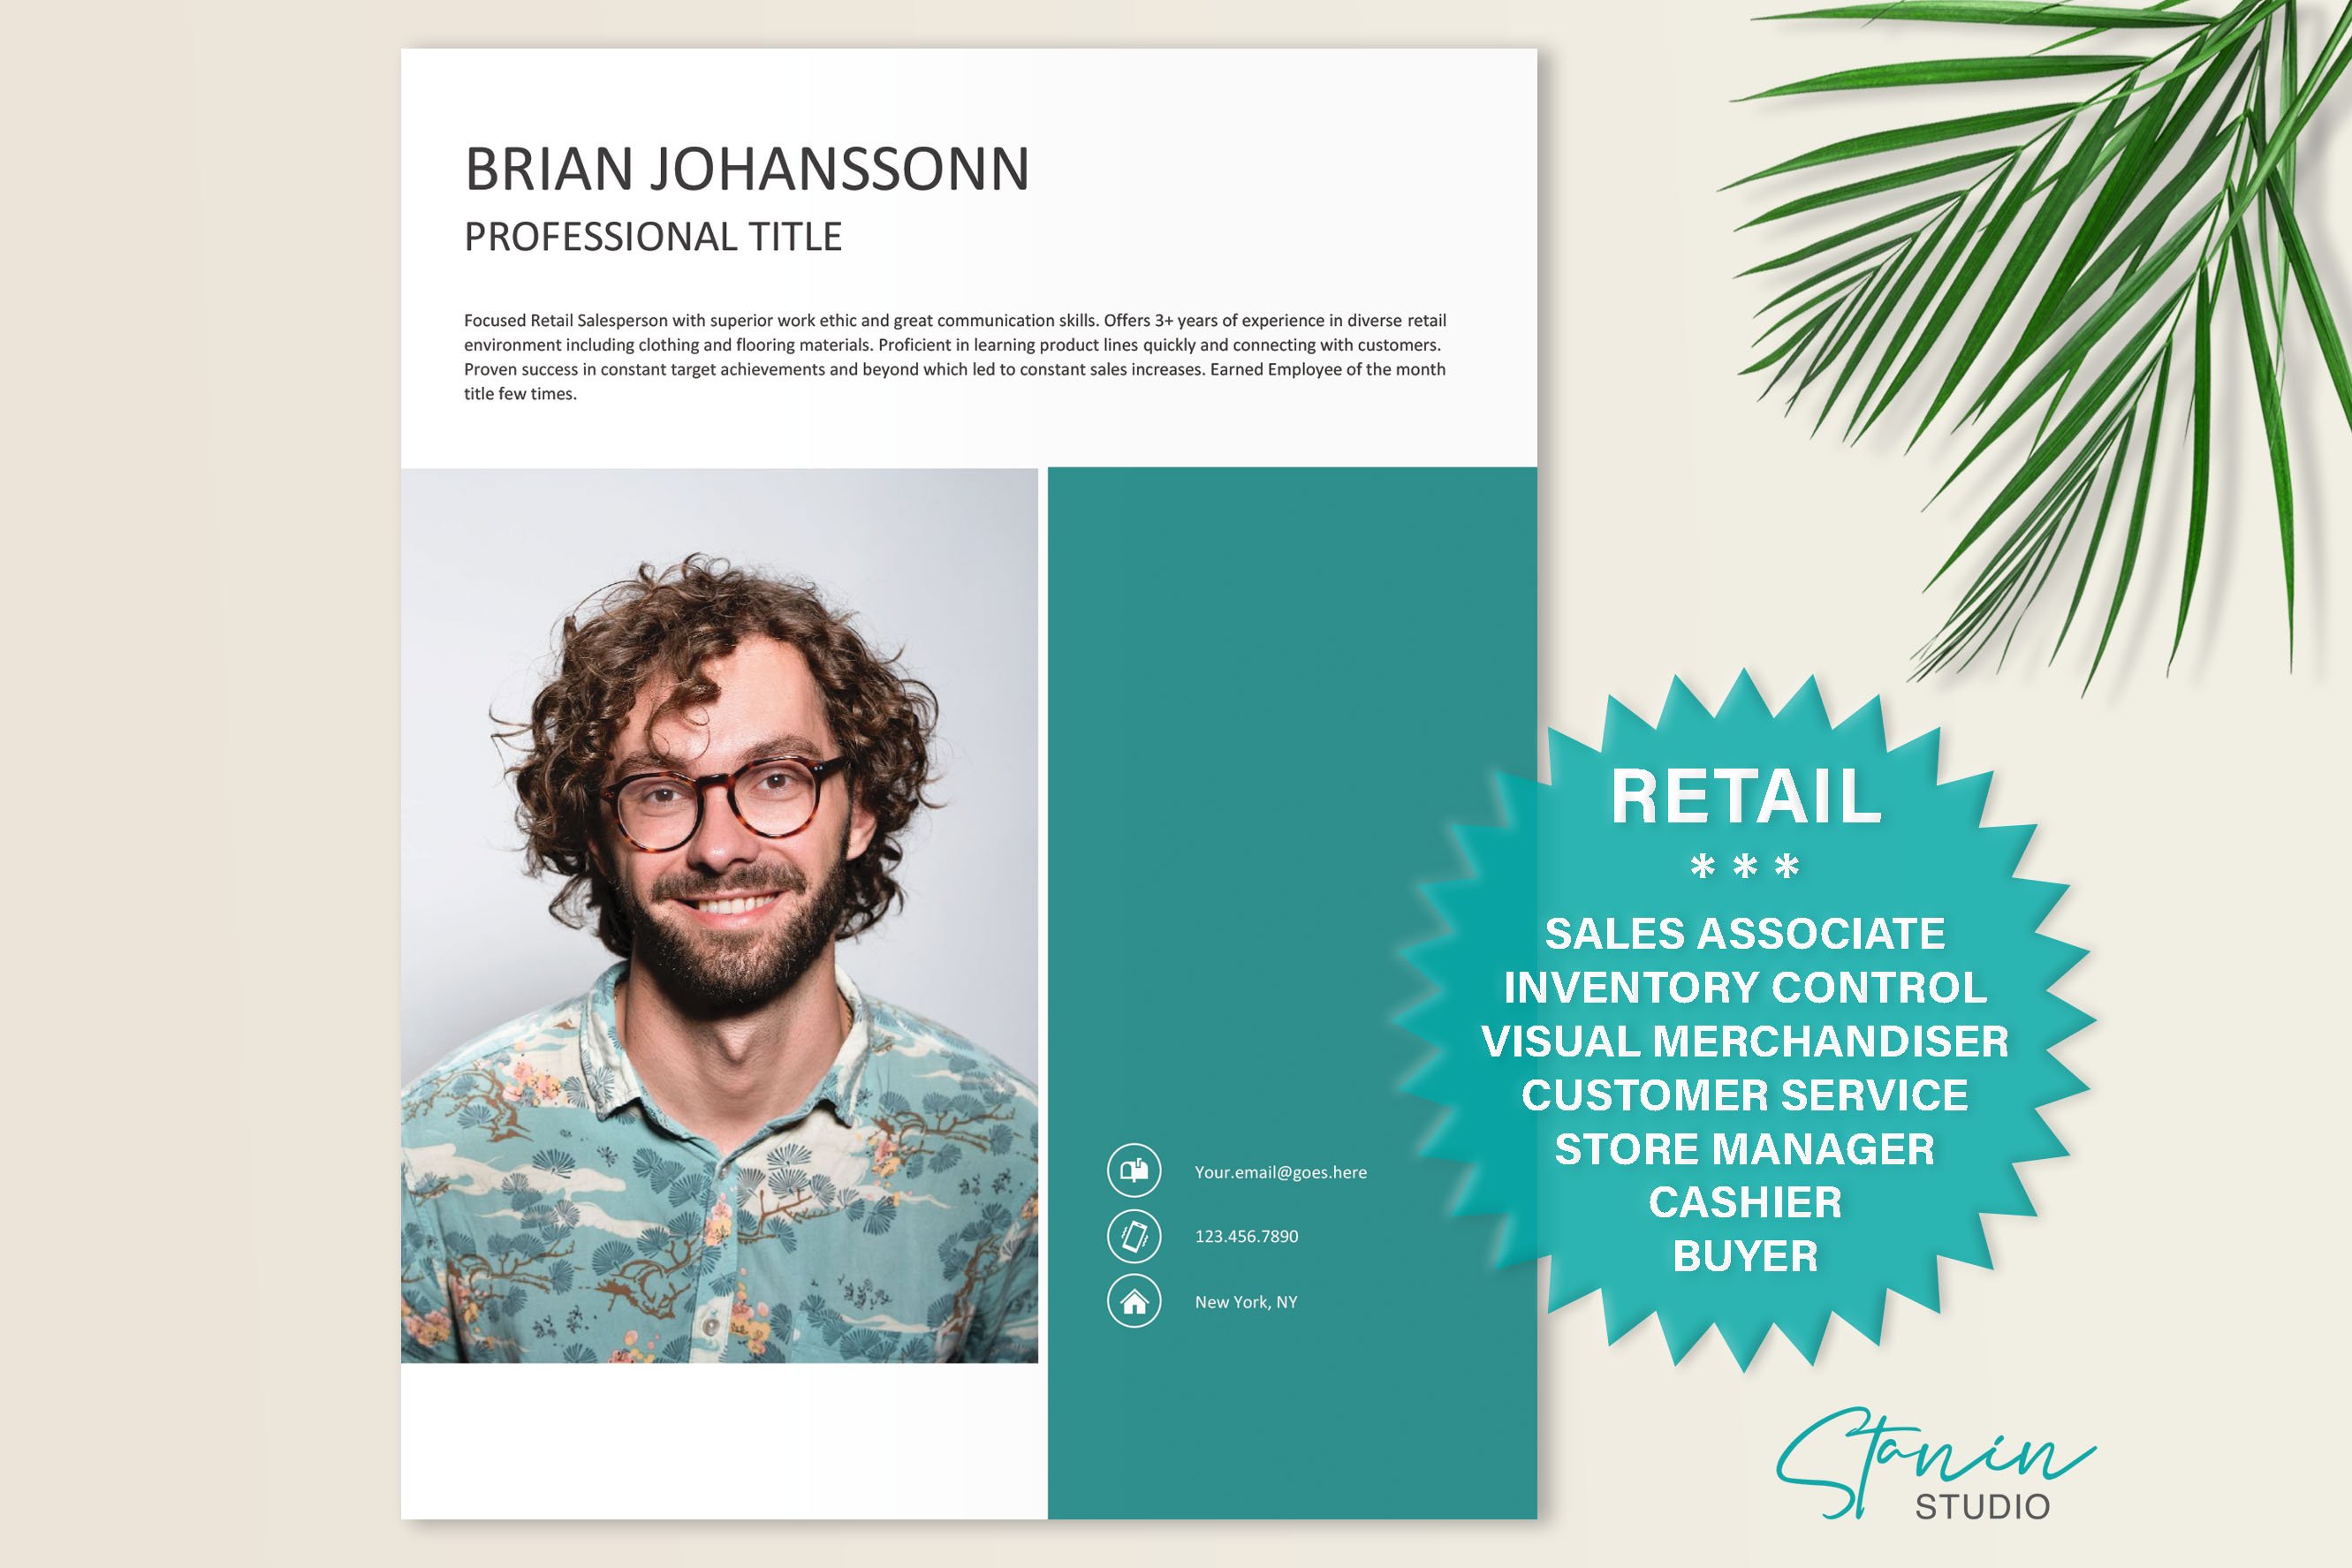 Salesperson Resume Template cover image.